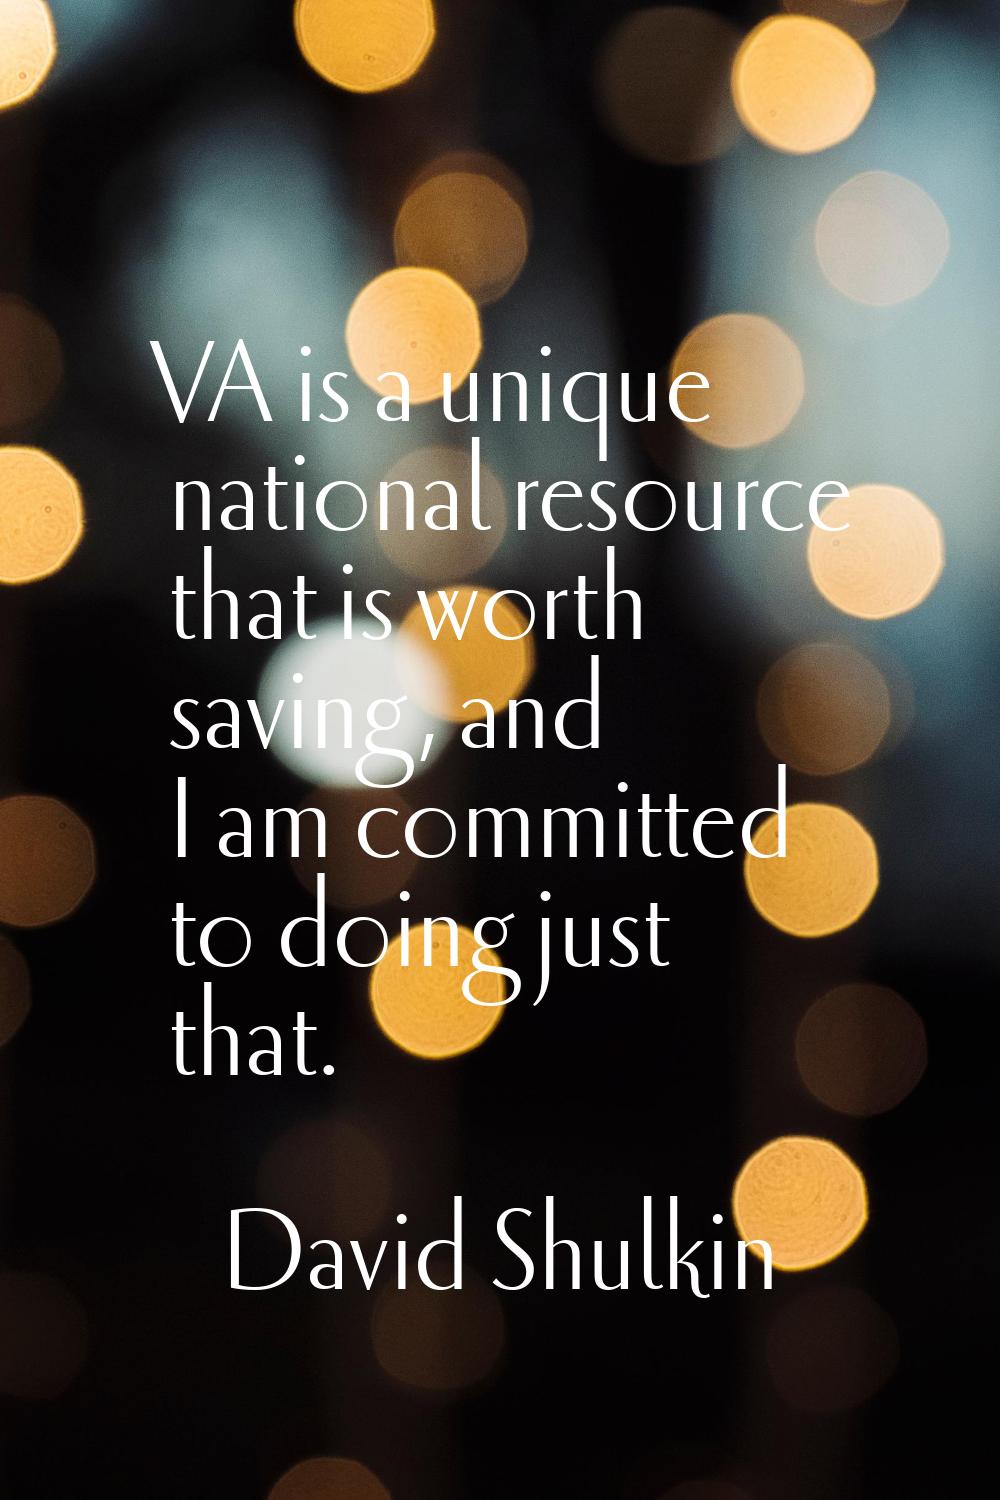 VA is a unique national resource that is worth saving, and I am committed to doing just that.